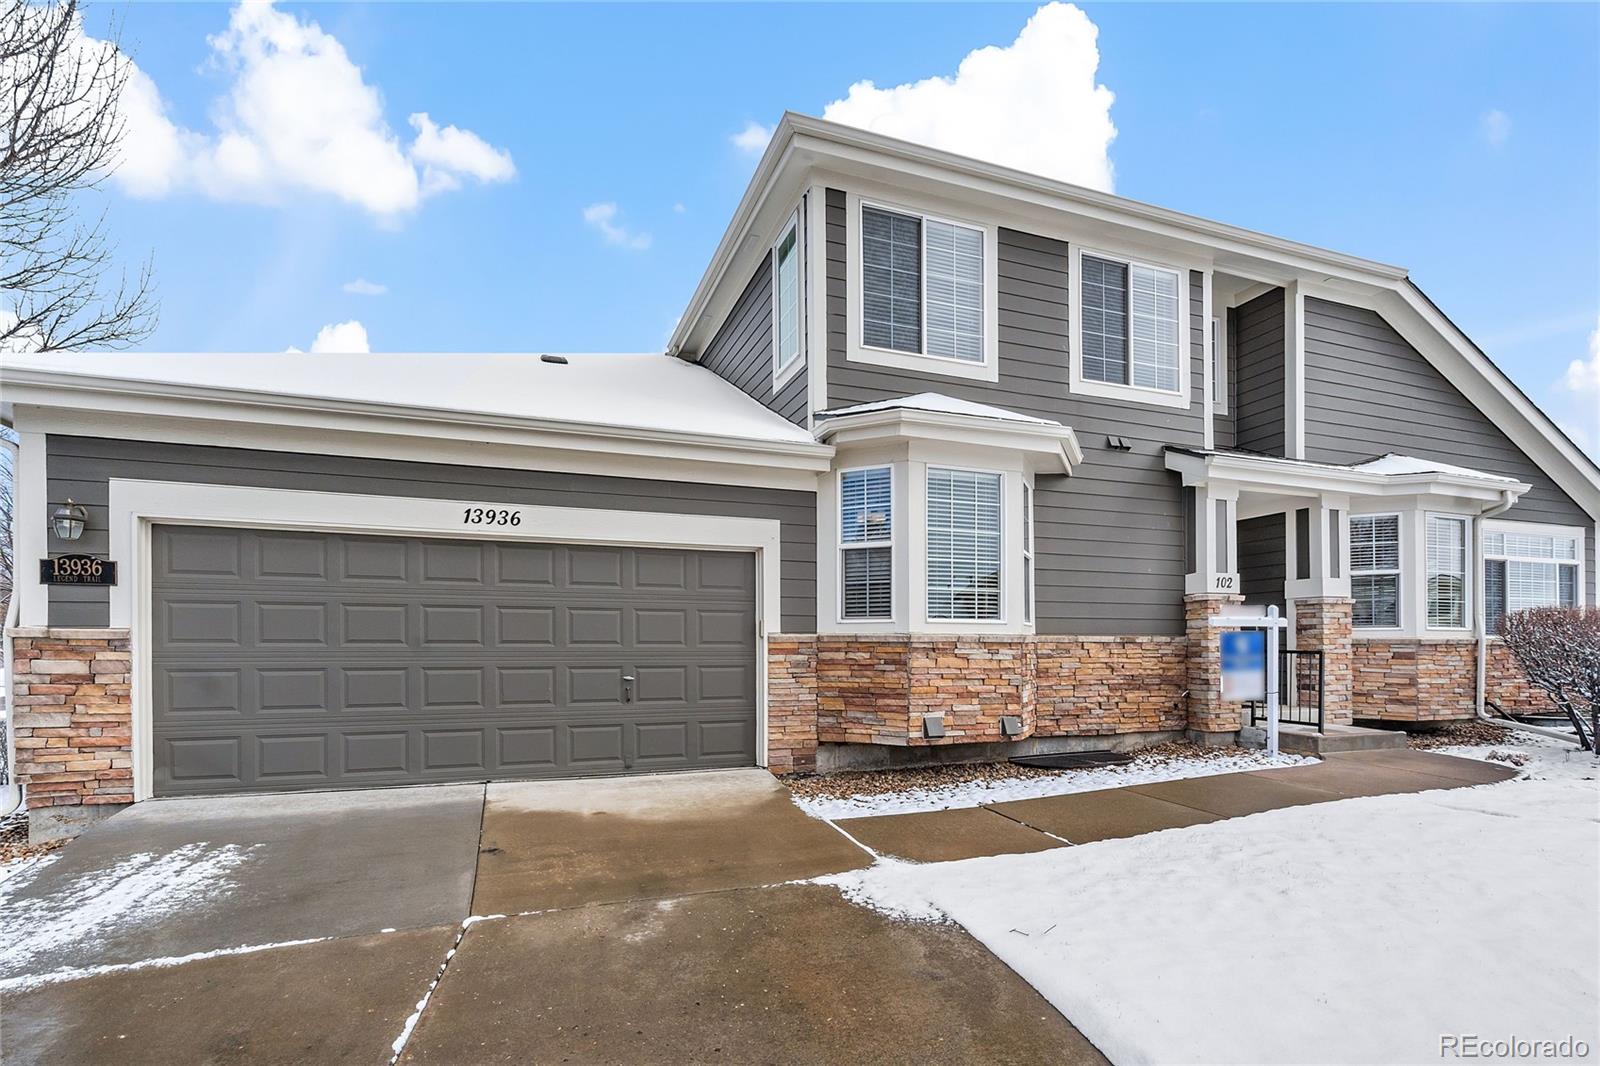 Report Image for 13936  Legend Trail,Broomfield, Colorado